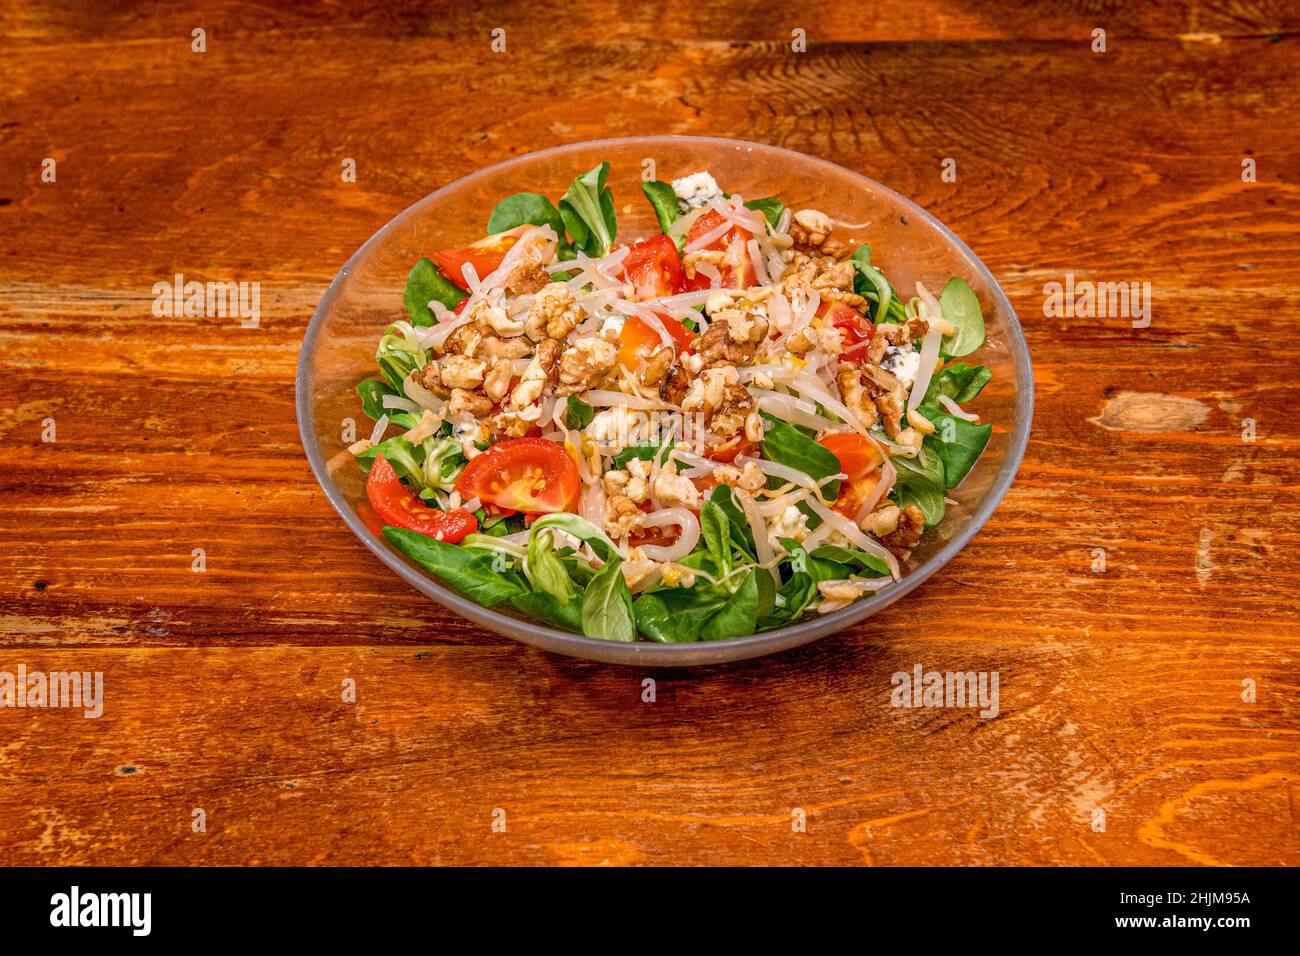 Salad concoction with all kinds of ingredients, blue cheese, lamb's lettuce, bean sprouts, cherry tomatoes and walnuts with oil and vinegar Stock Photo